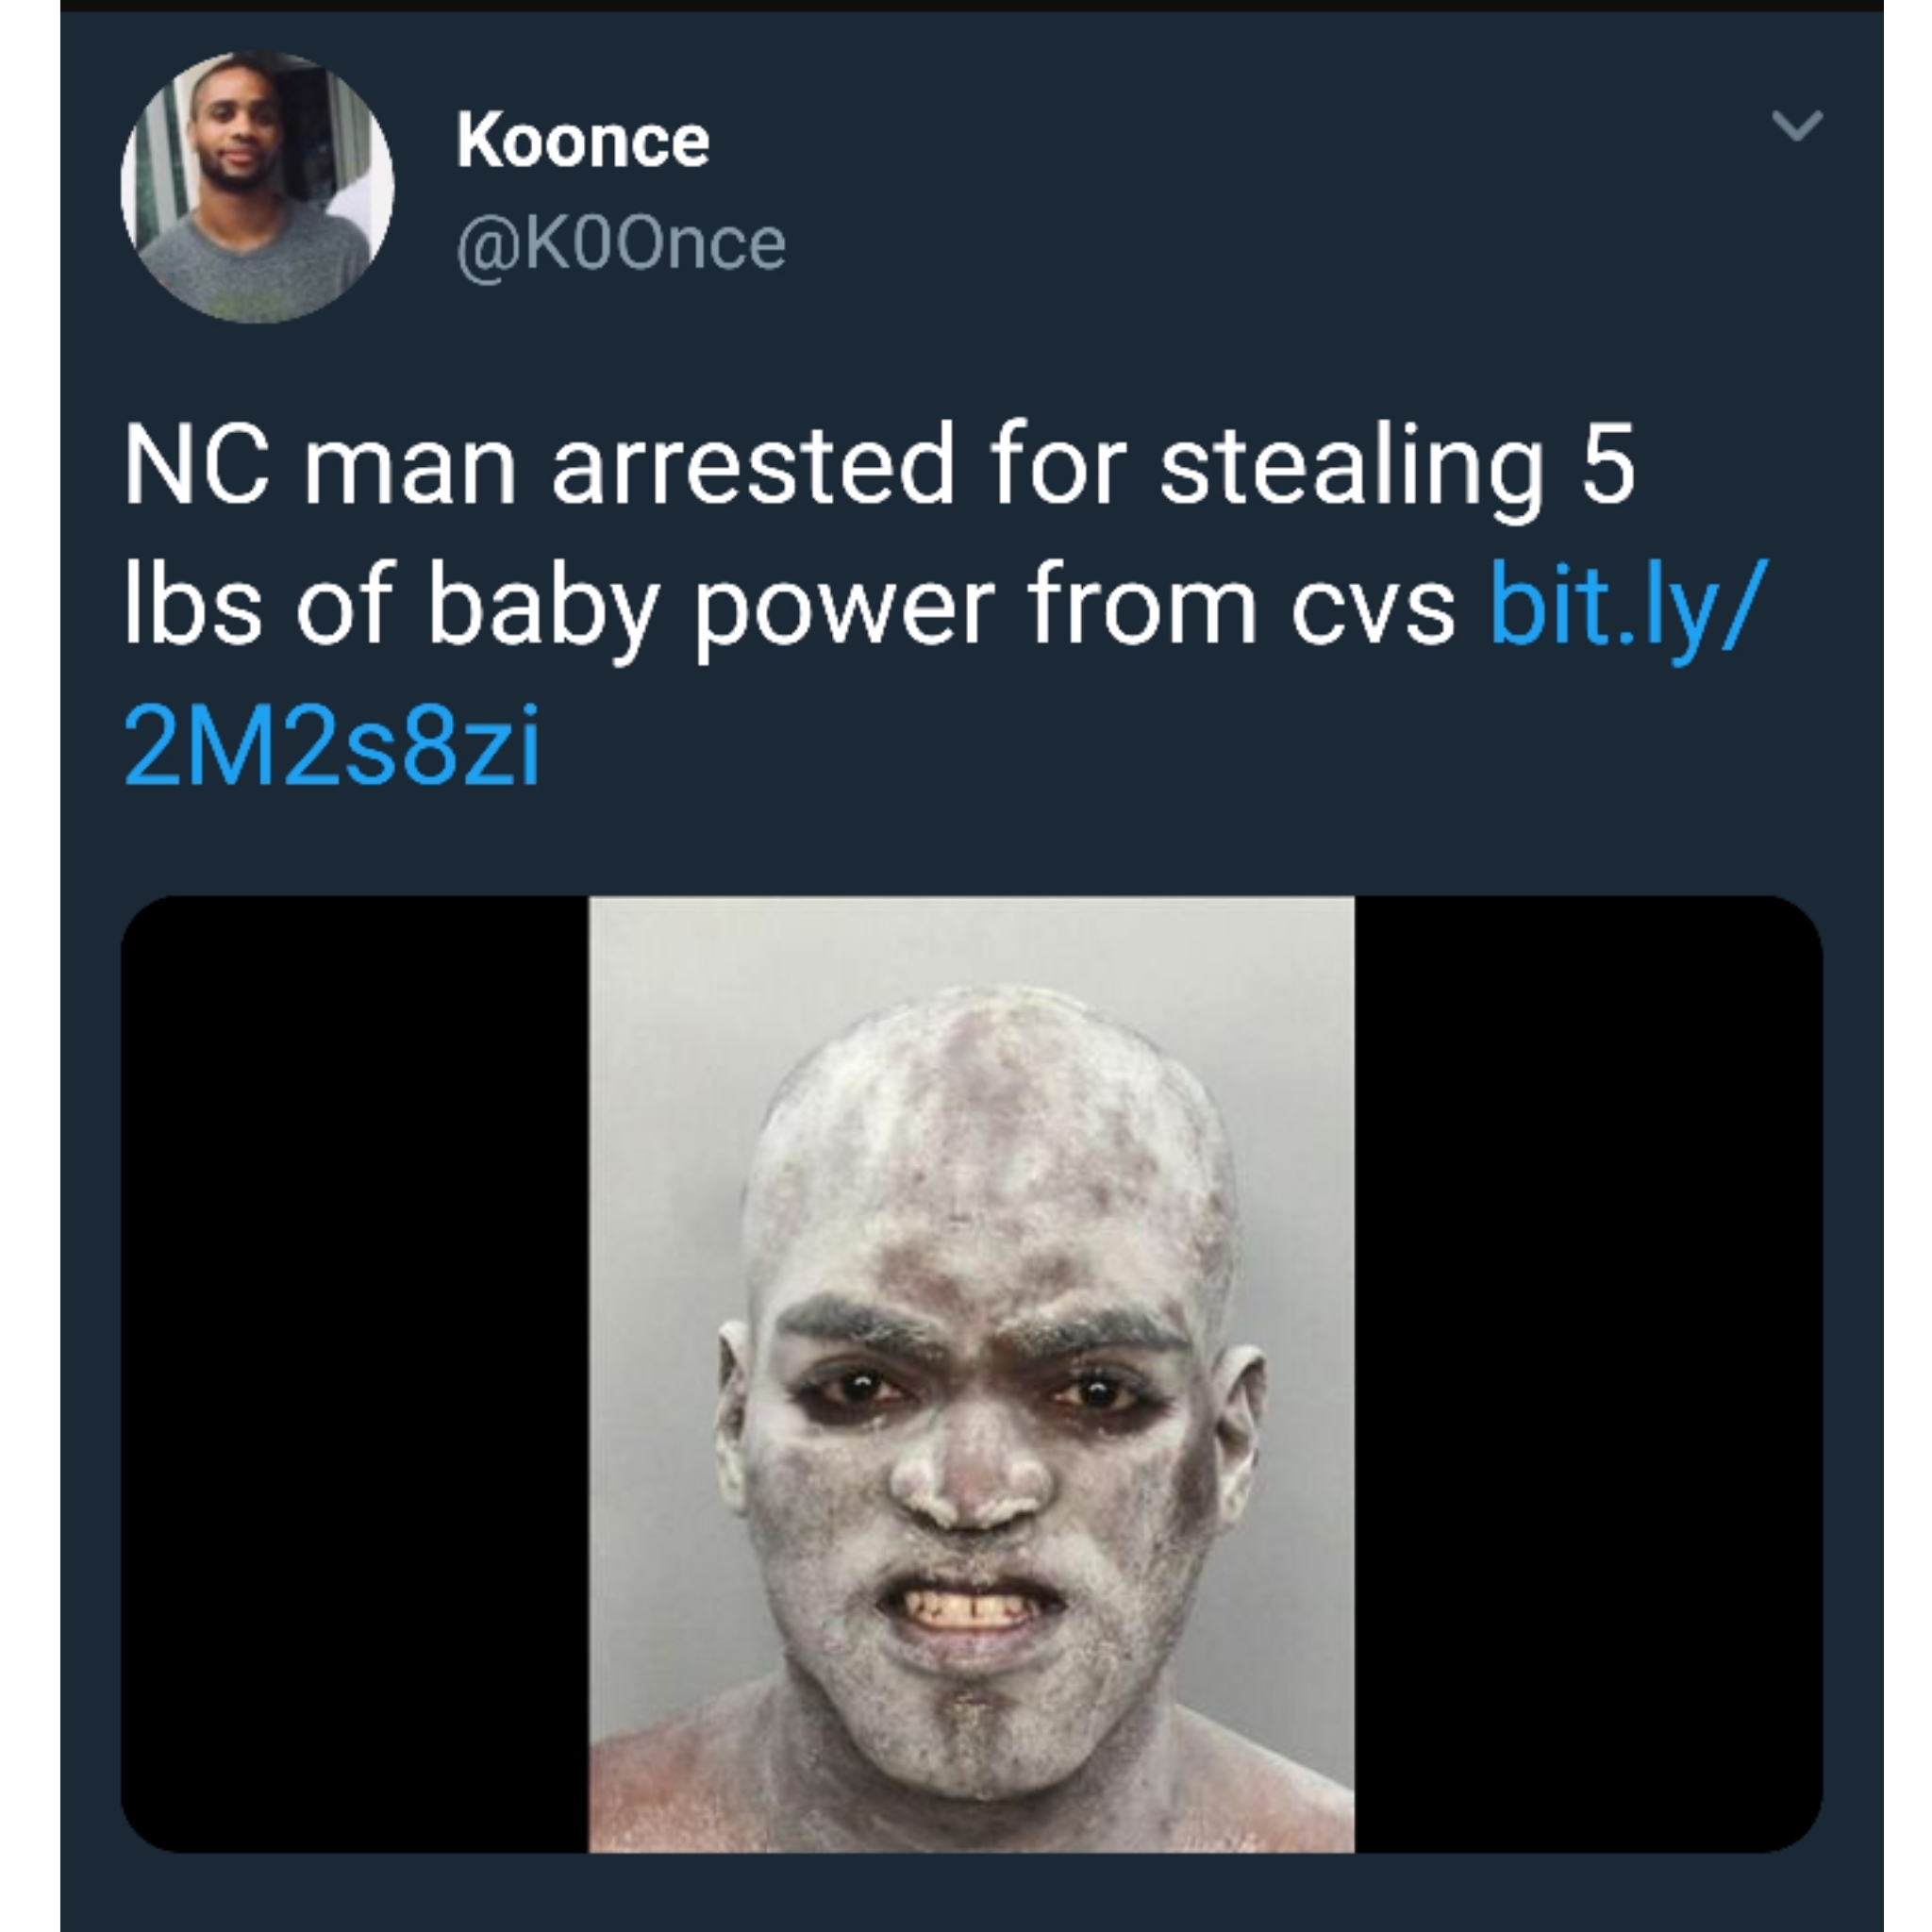 man arrested for stealing memes - Koonce Nc man arrested for stealing 5 lbs of baby power from cvs bit.ly 2M2s8zi